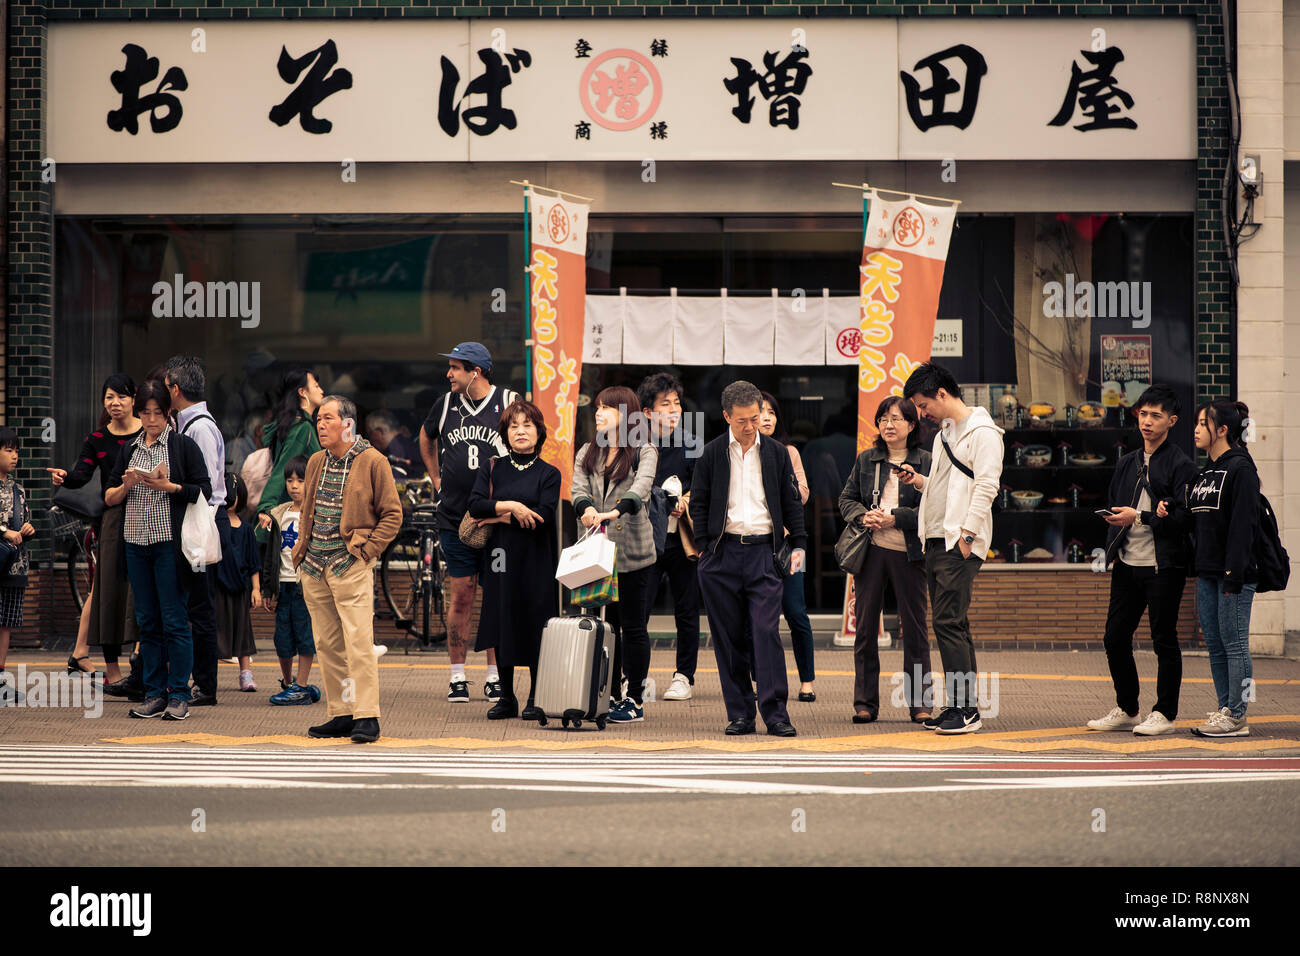 Japanese members of the public waiting to cross the road in the Shinjuku area of Tokyo Stock Photo